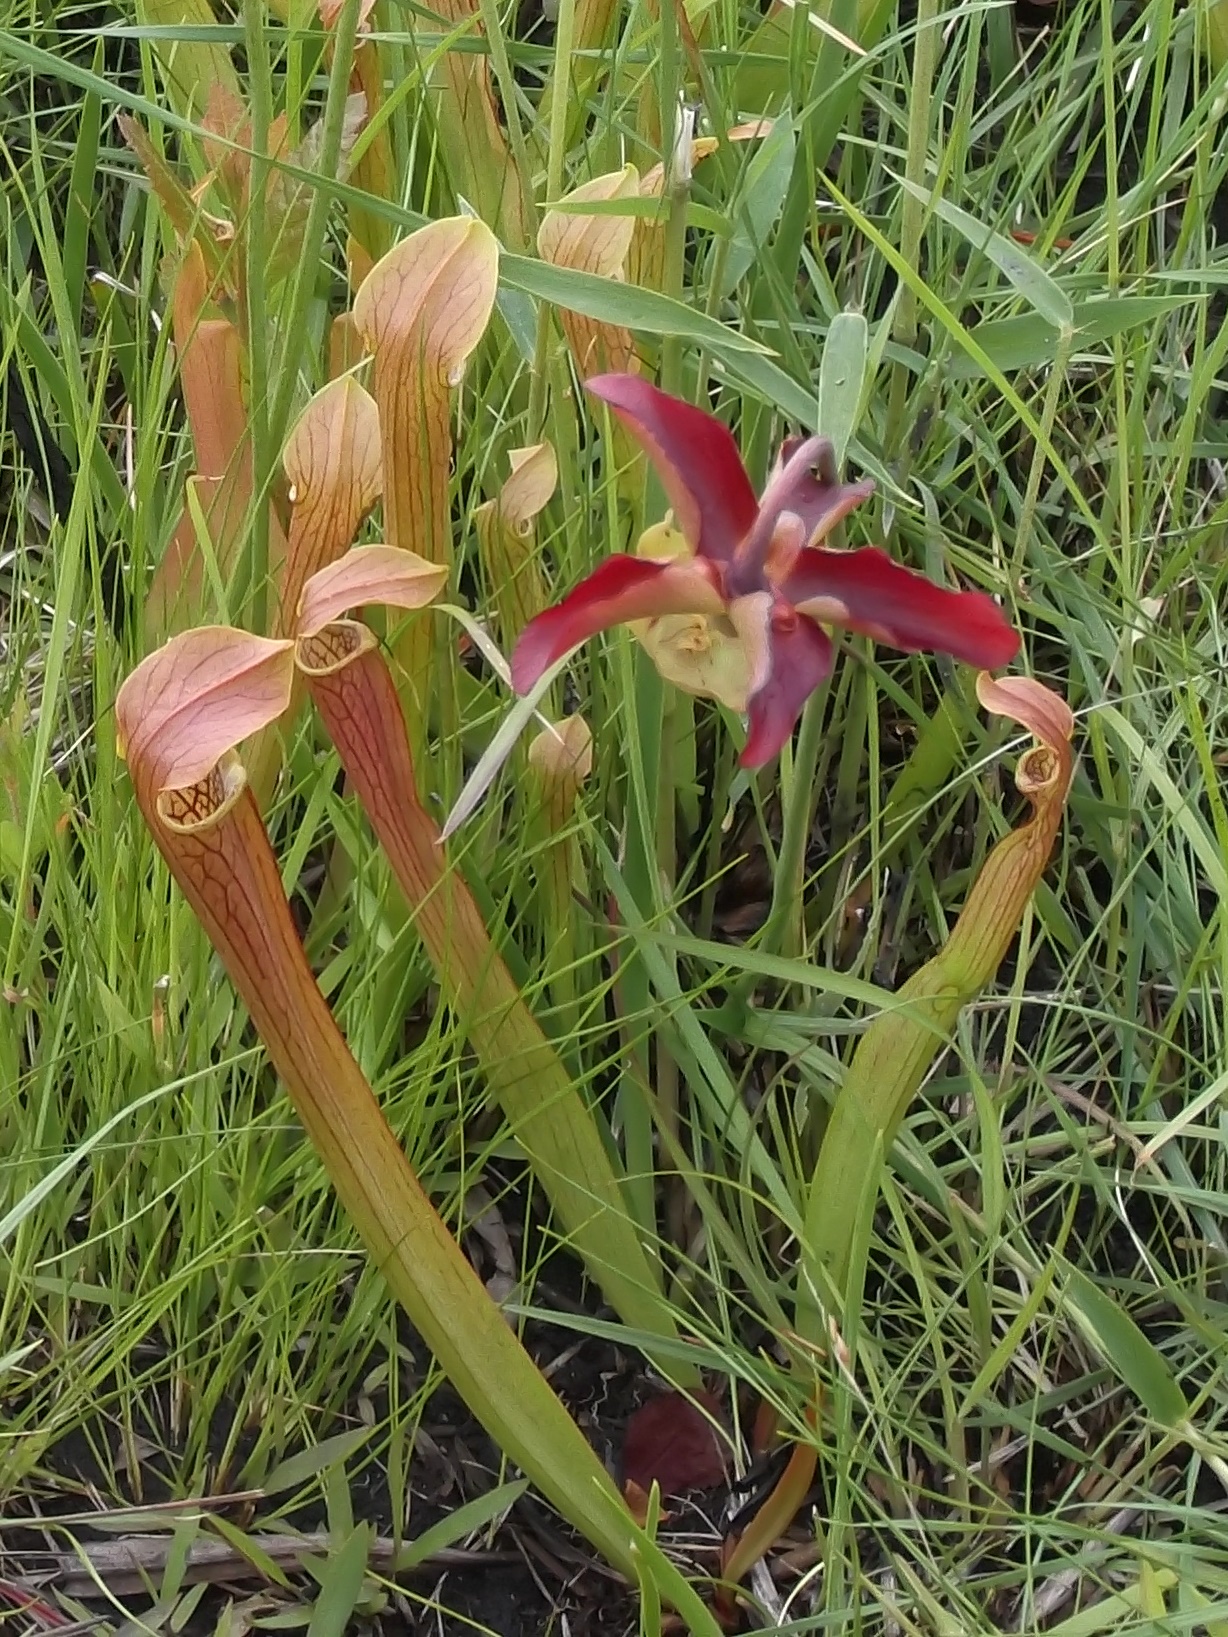 The Scientific Name is Sarracenia rubra ssp. rubra. You will likely hear them called Sweet Pitcherplant, Red Pitcherplant, Sweet Pitcher-plant. This picture shows the Narrow and erect hollow pitchers. of Sarracenia rubra ssp. rubra